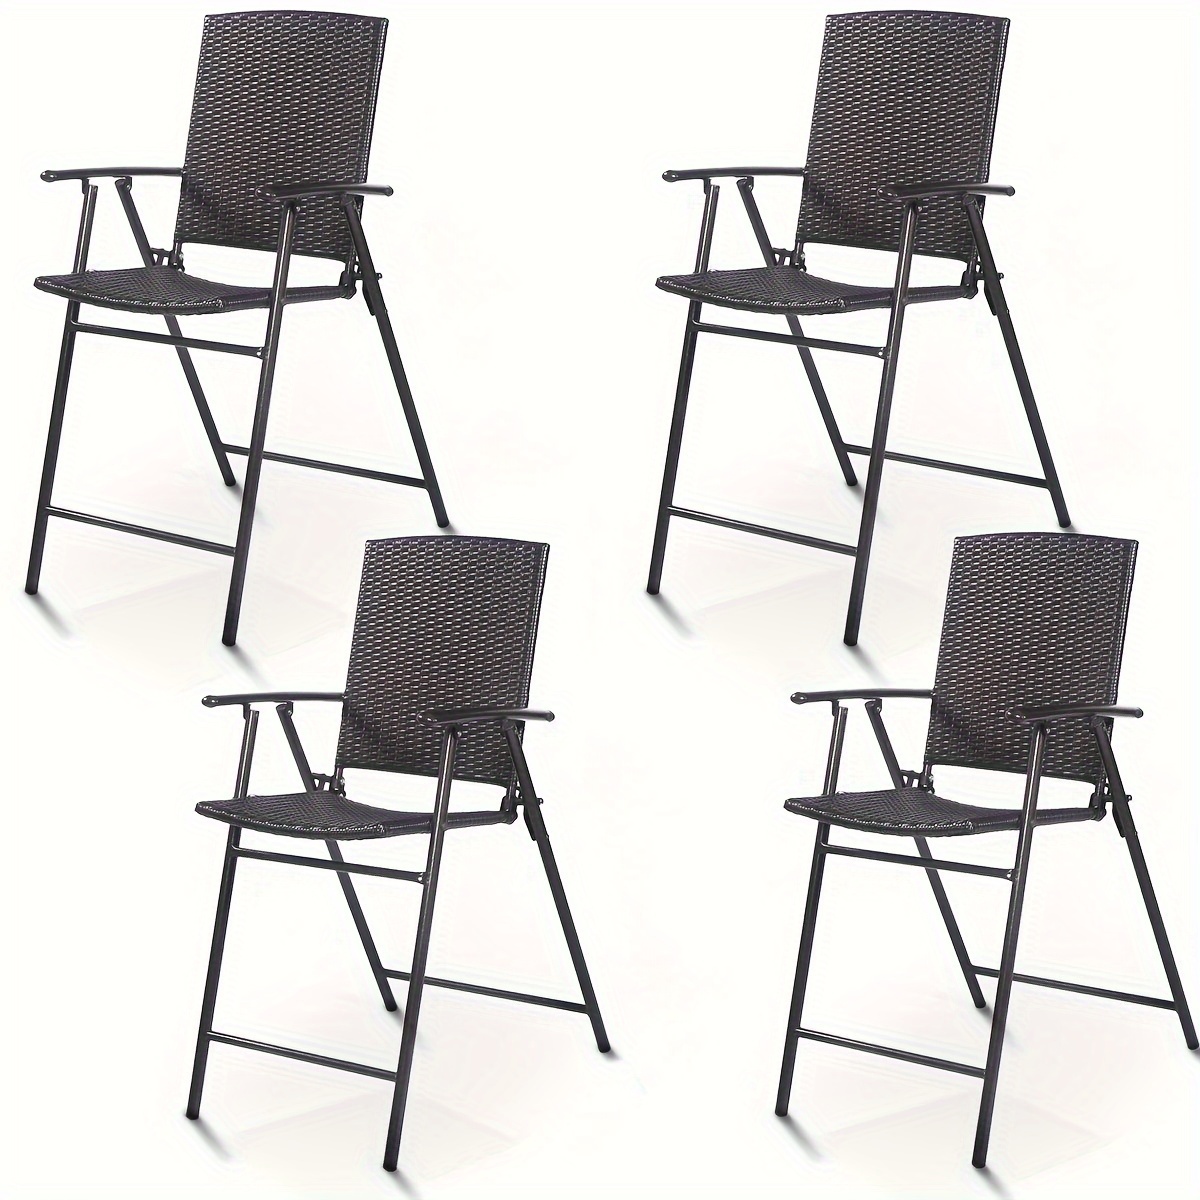 

Set Of 4 Folding Wicker Rattan Bar Chairs, High Stool With Back Steel Frame, Portable Outdoor Indoor Bar Stools, Garden Patio Furniture Set With Armrests Footrest